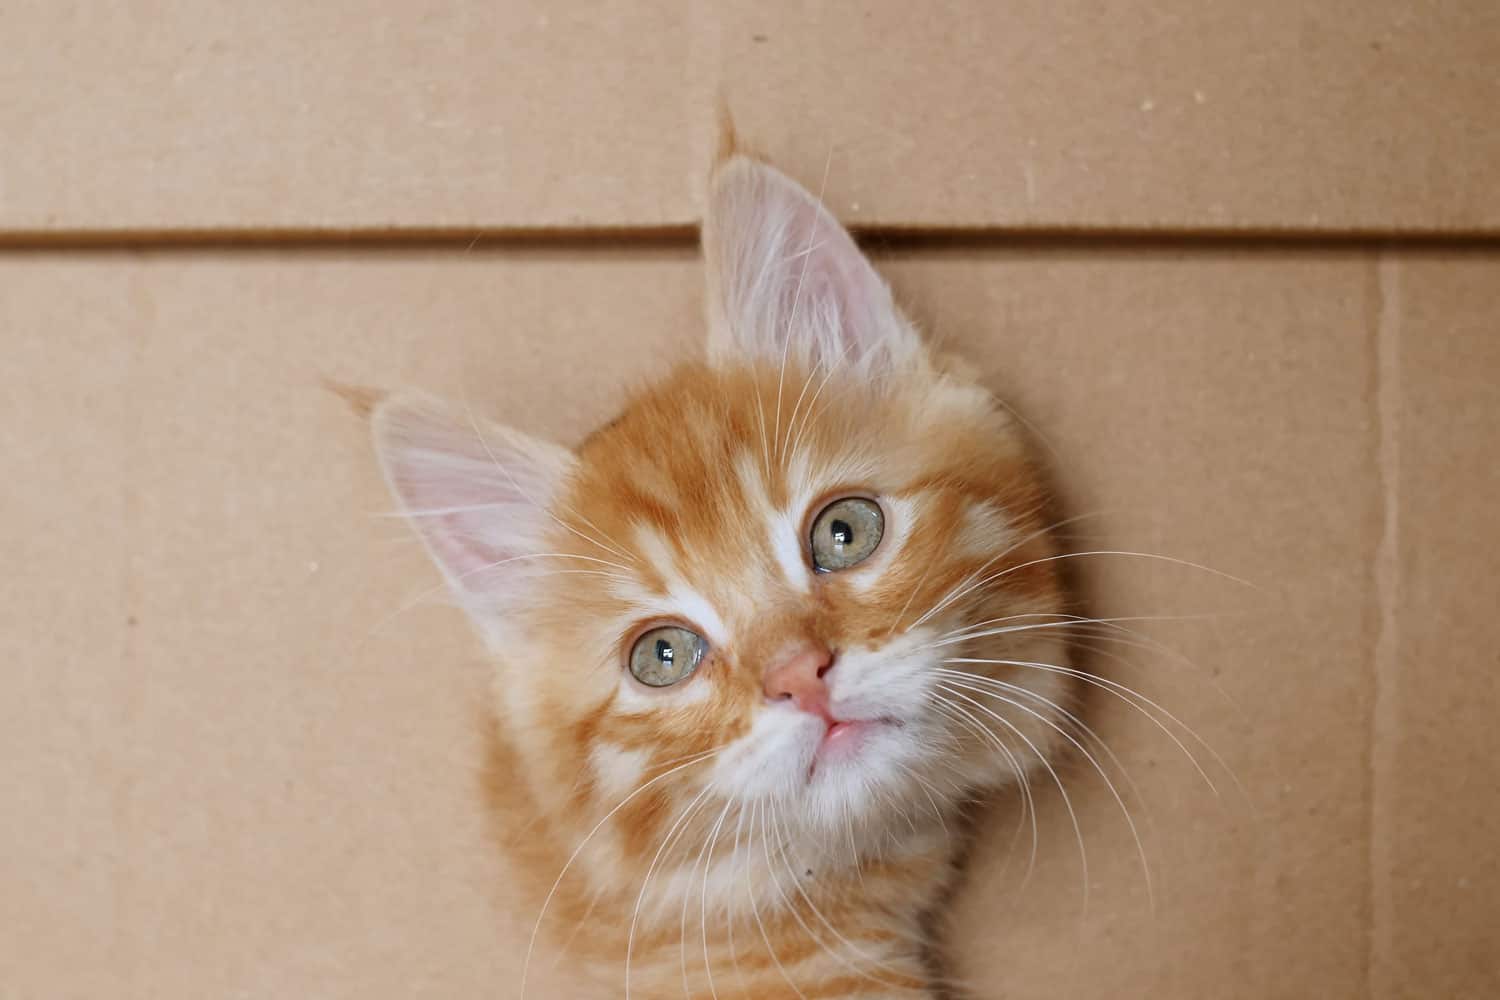 Cute Ginger Kitten Getting out From Hole in a Cardboard Box. Cat Hiding in Box.
